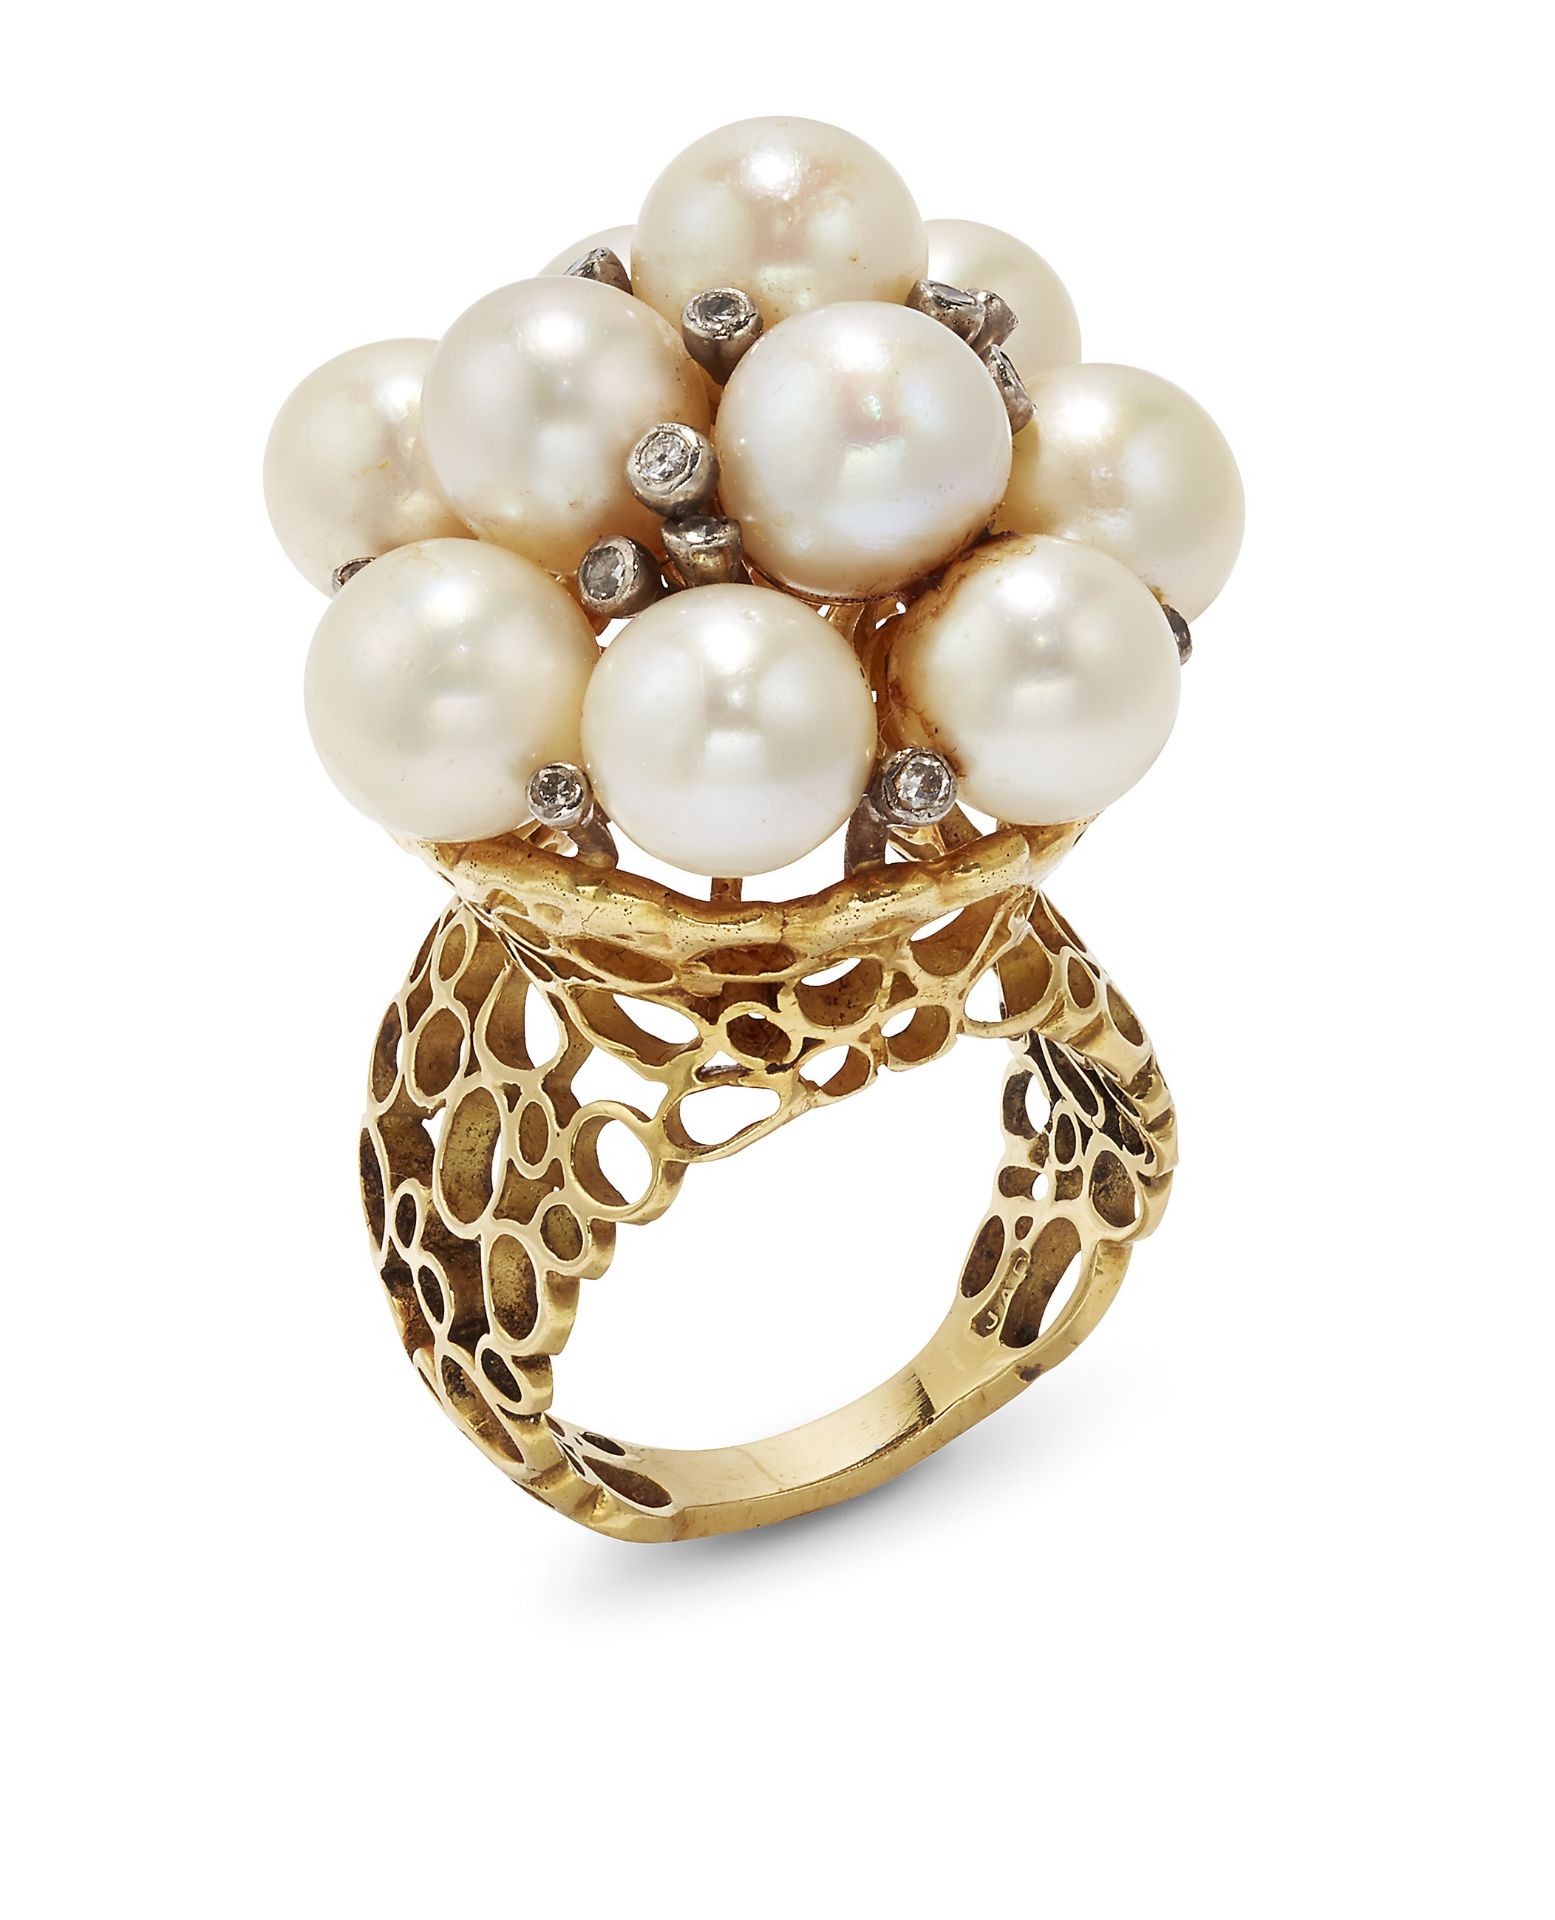 A cultured pearl and diamond ring, by John Donald, 1971